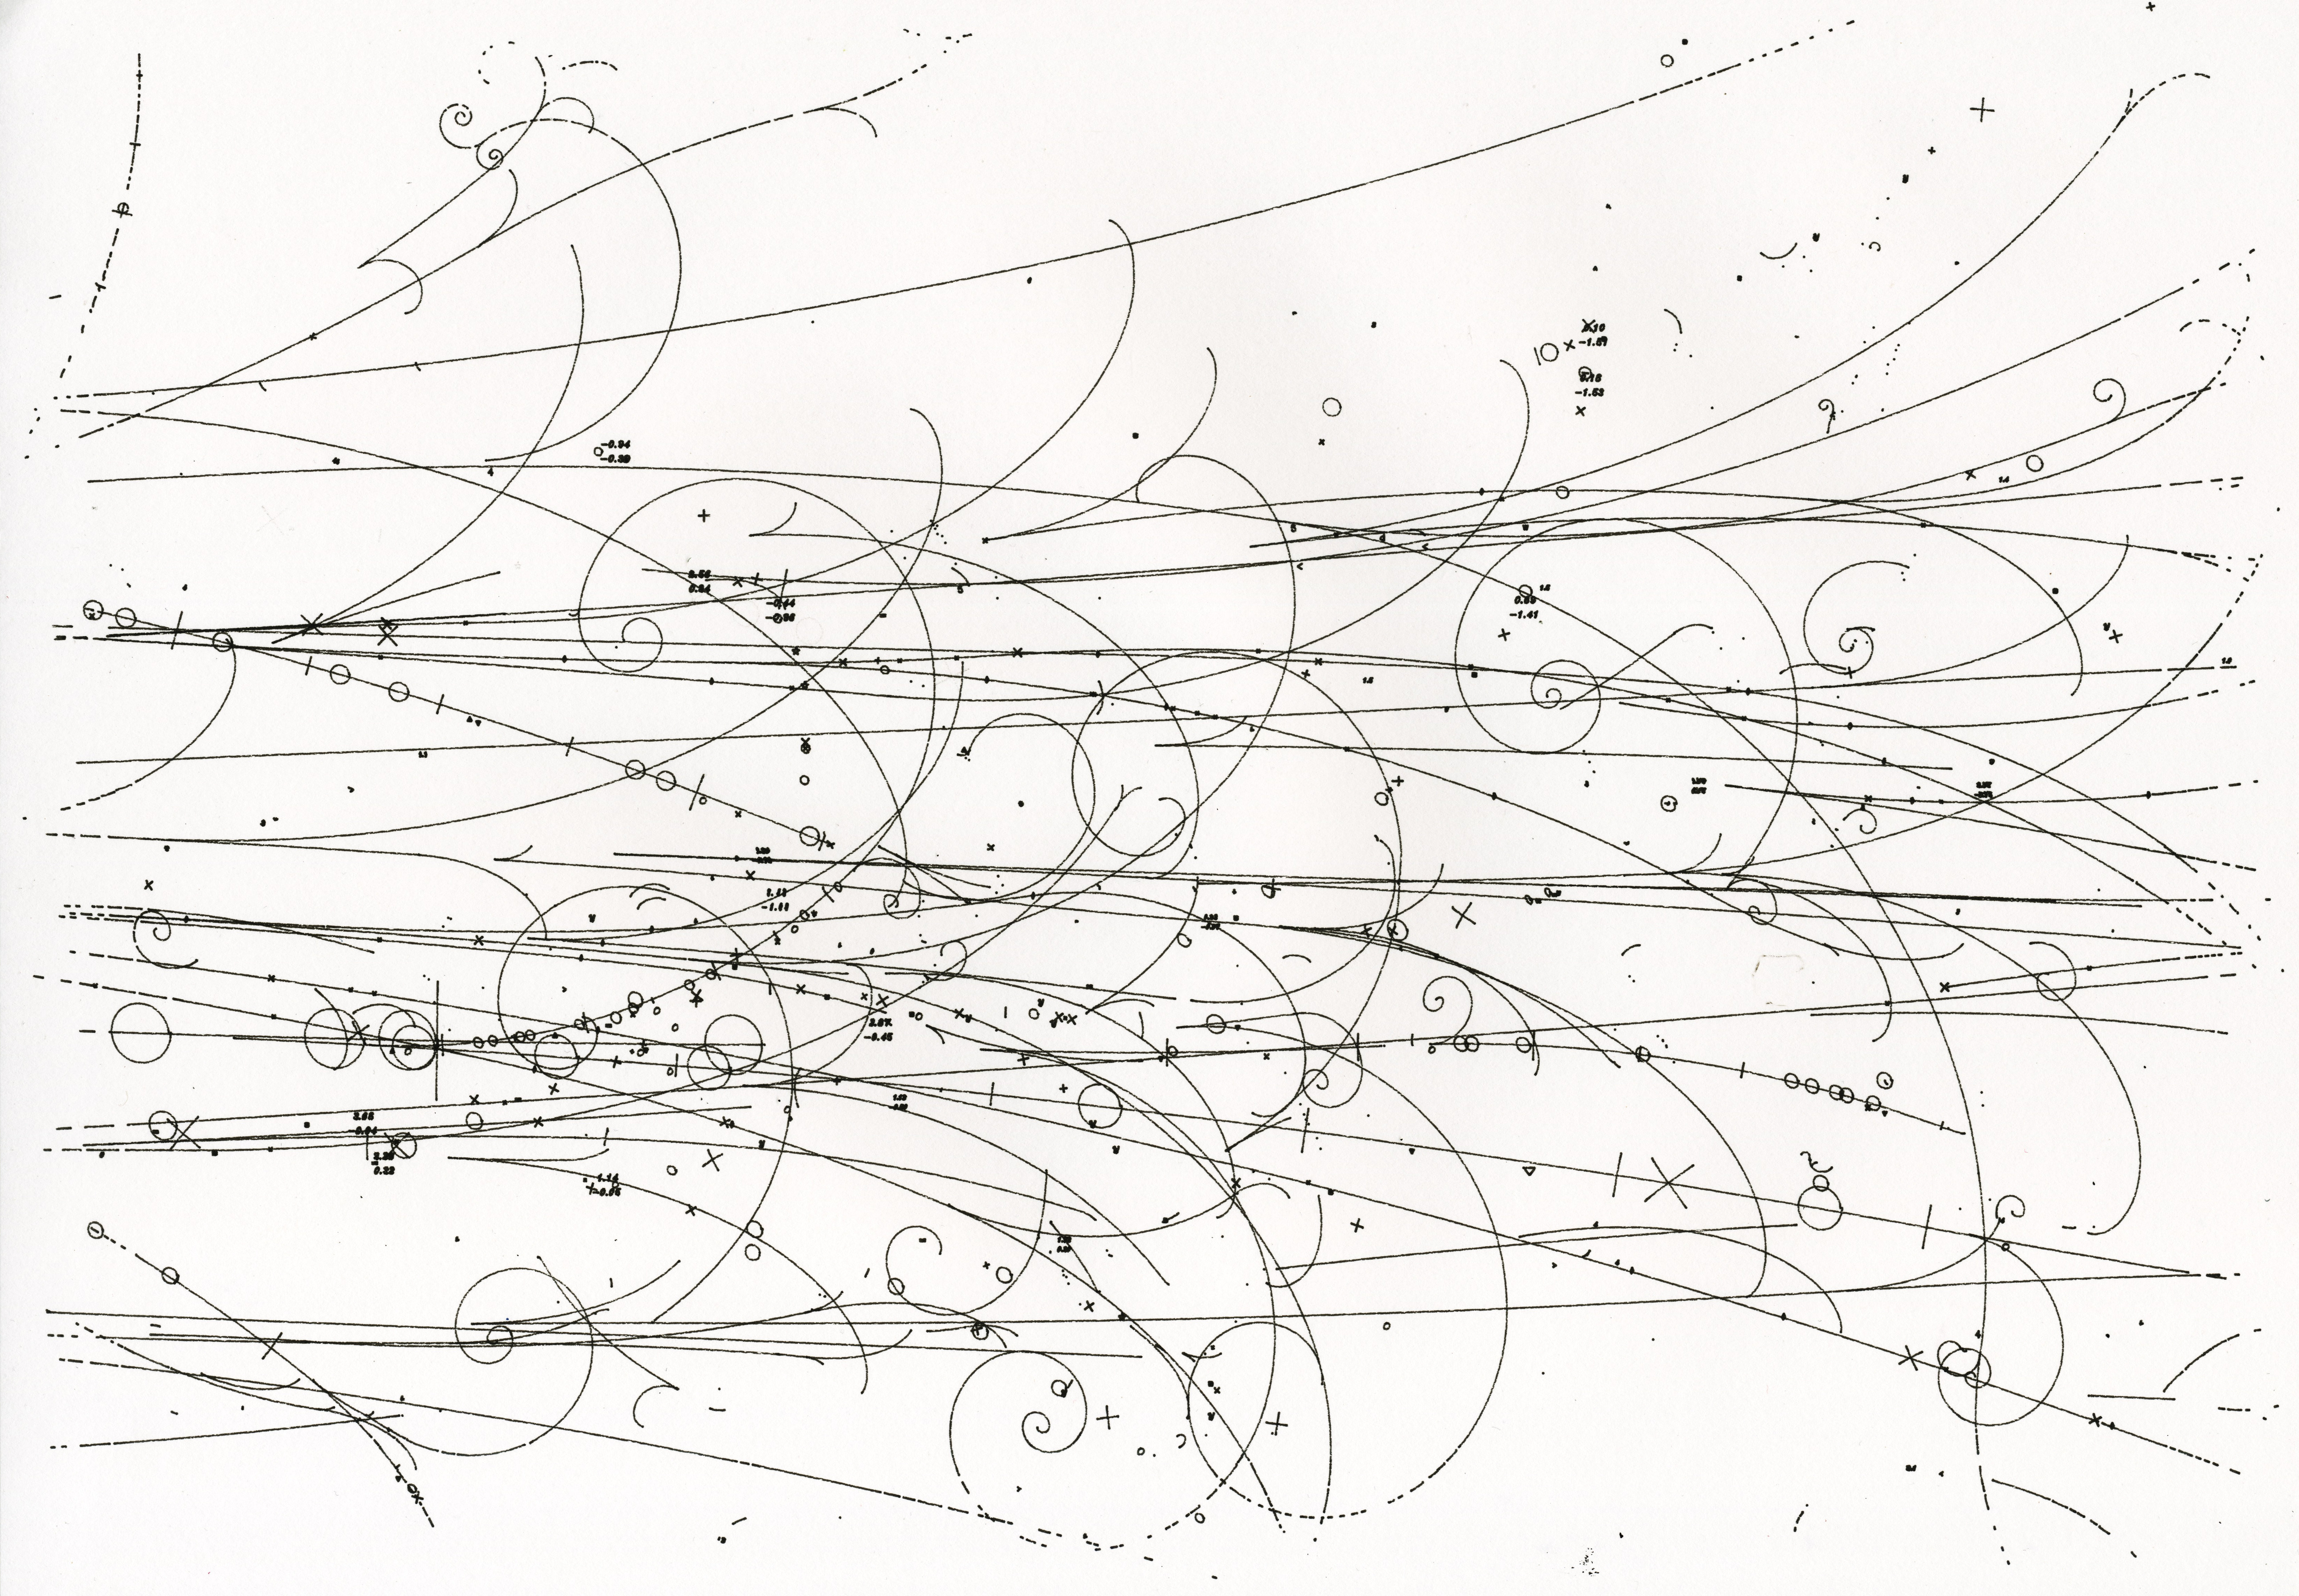 scan of a plotted diagram, it has lines curving away from the right & symbols clustering along their length